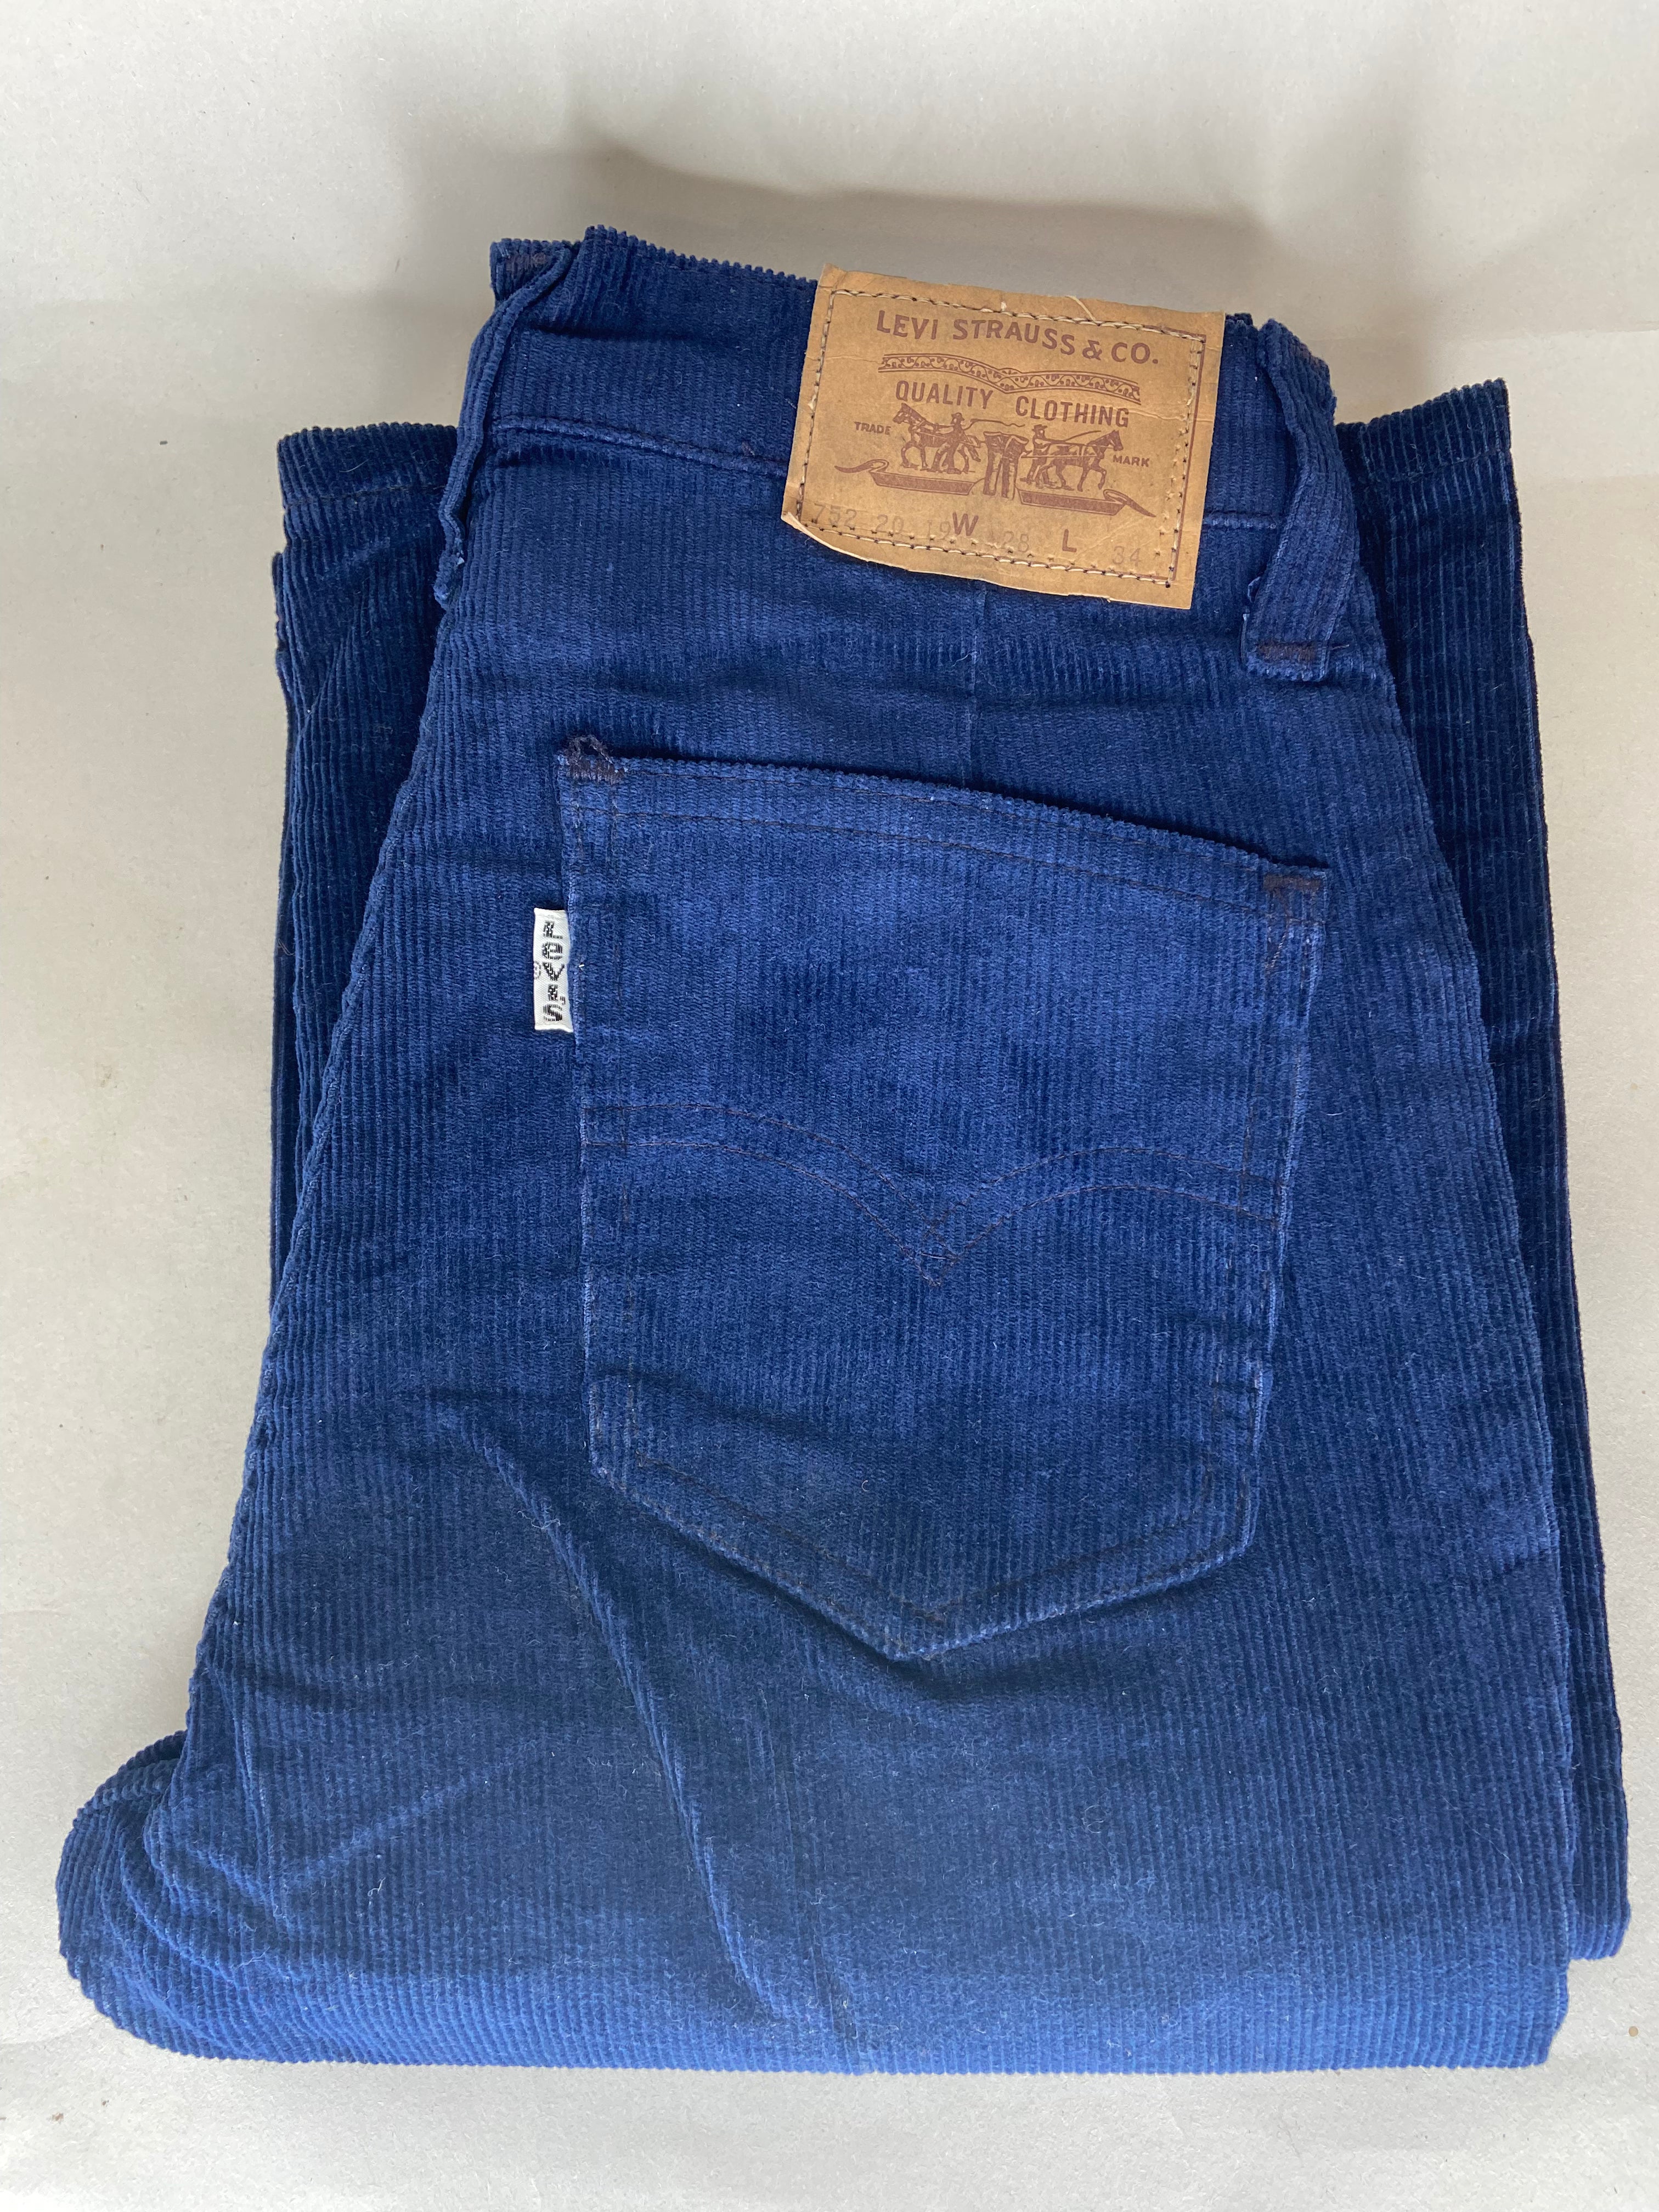 Vintage Levis 1970s Corduroy White Tab Flares in Blue Deadstock